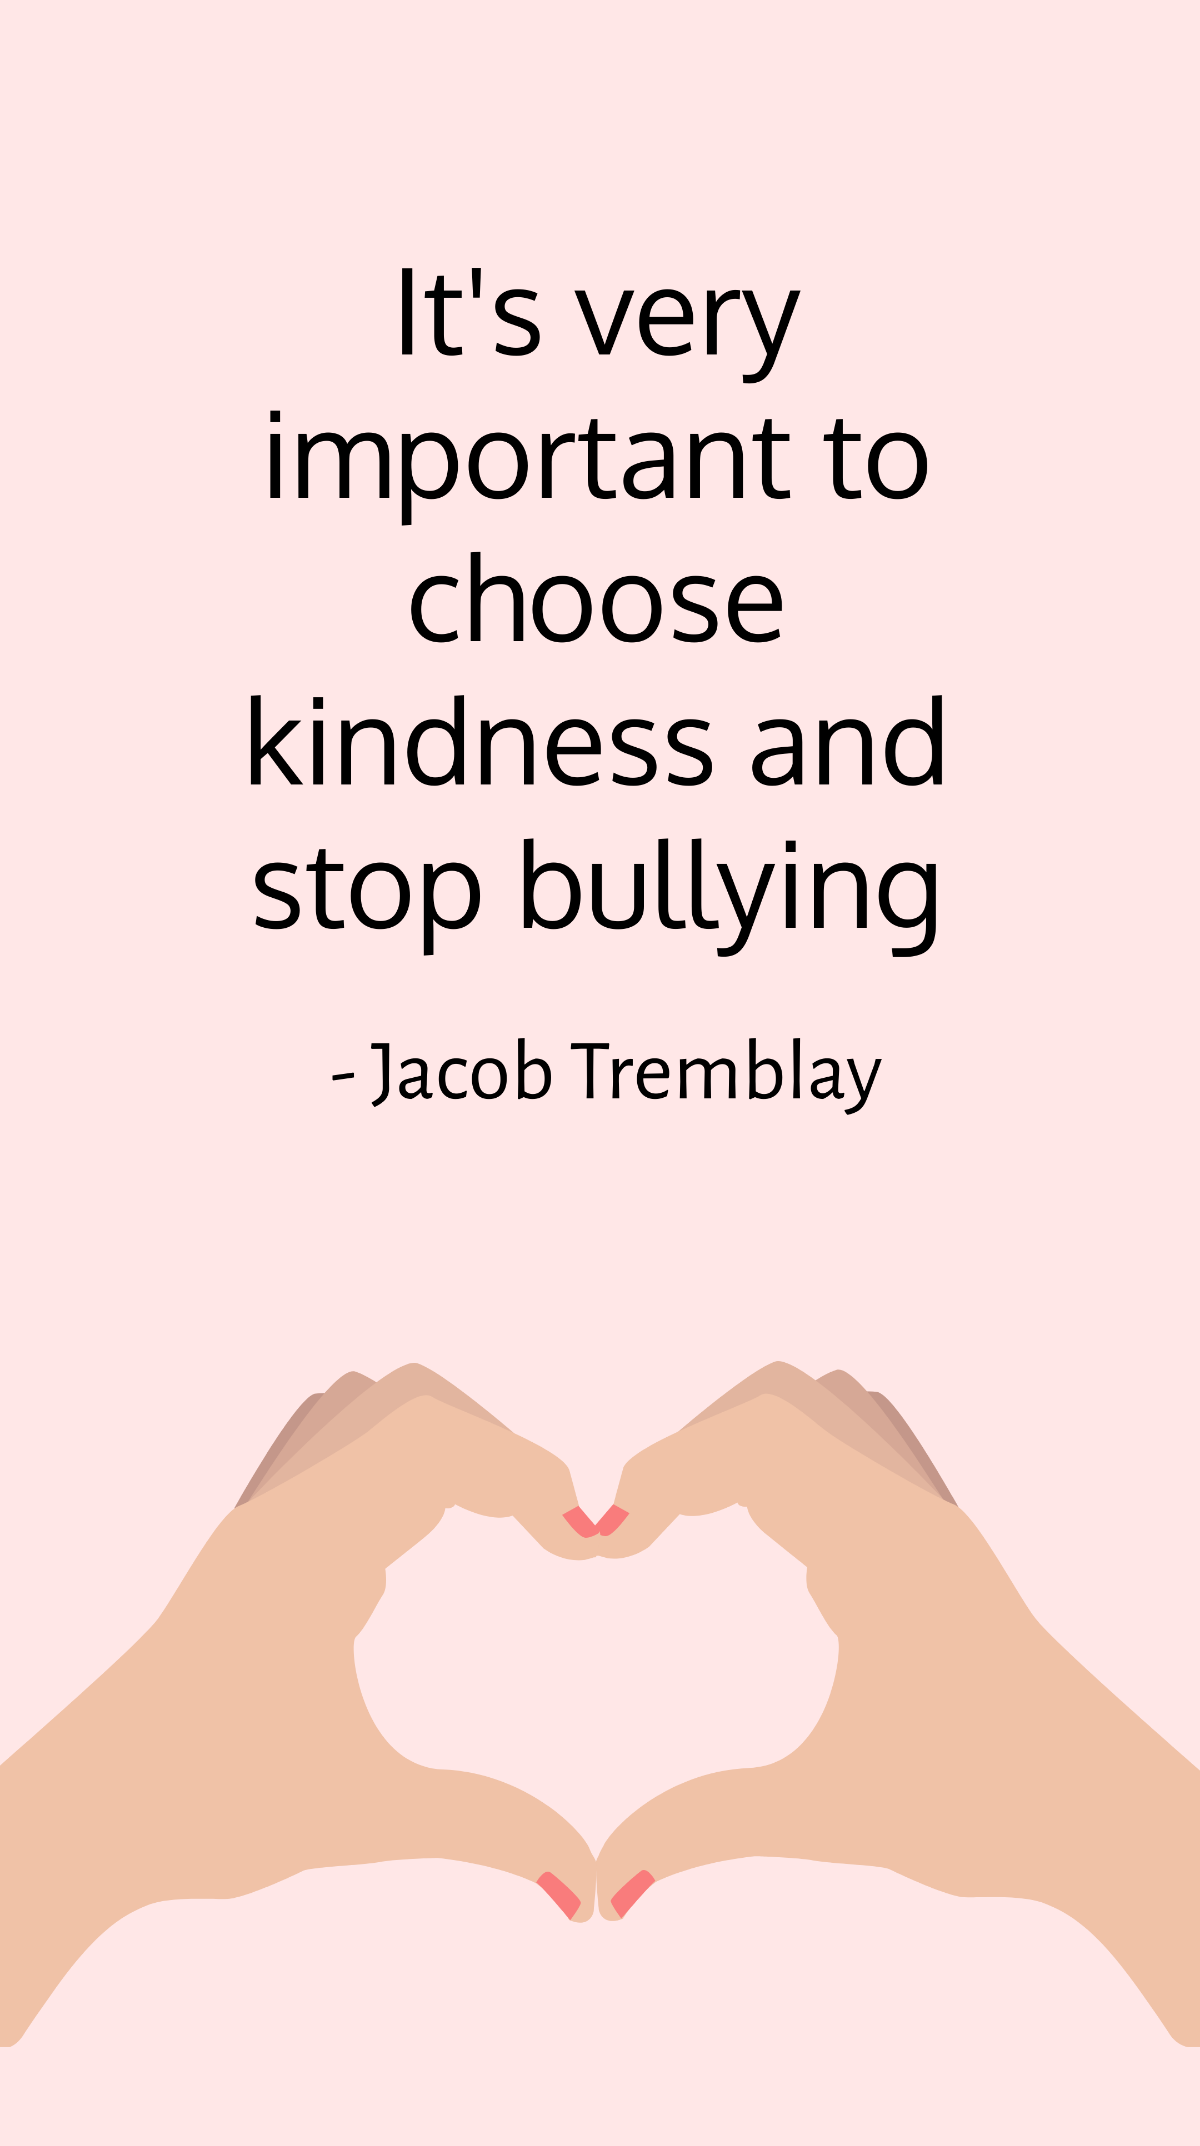 Jacob Tremblay - It's very important to choose kindness and stop bullying Template